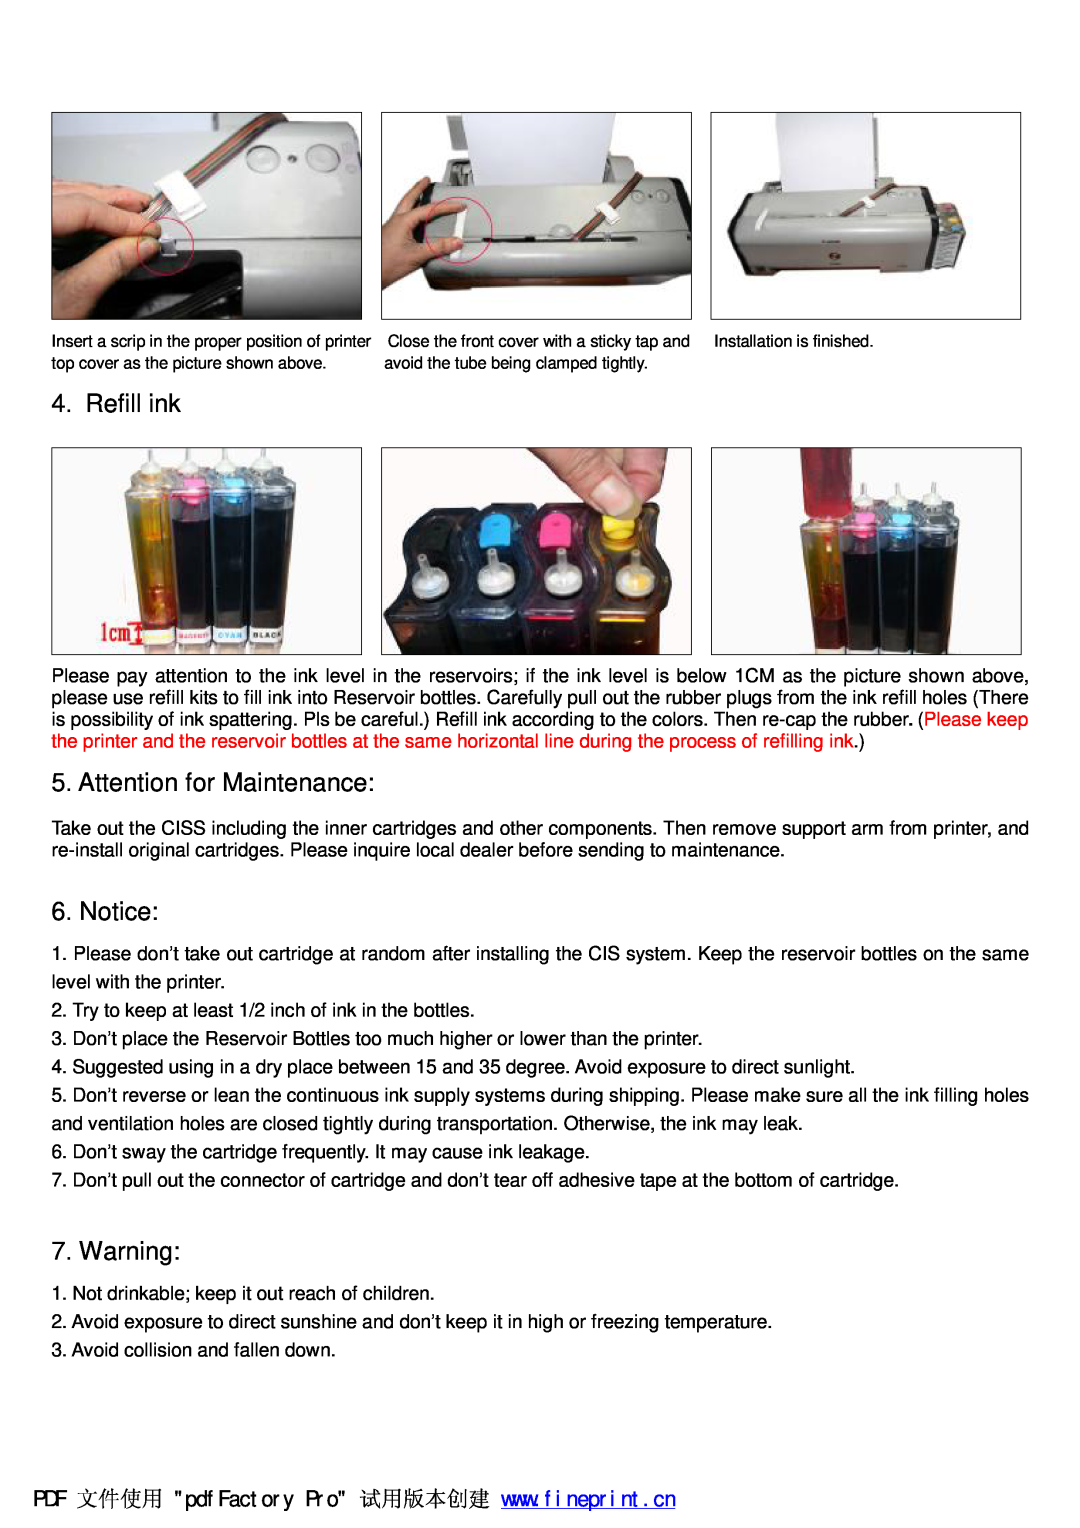 Canon IP 1000 manual Refill ink, Attention for Maintenance 